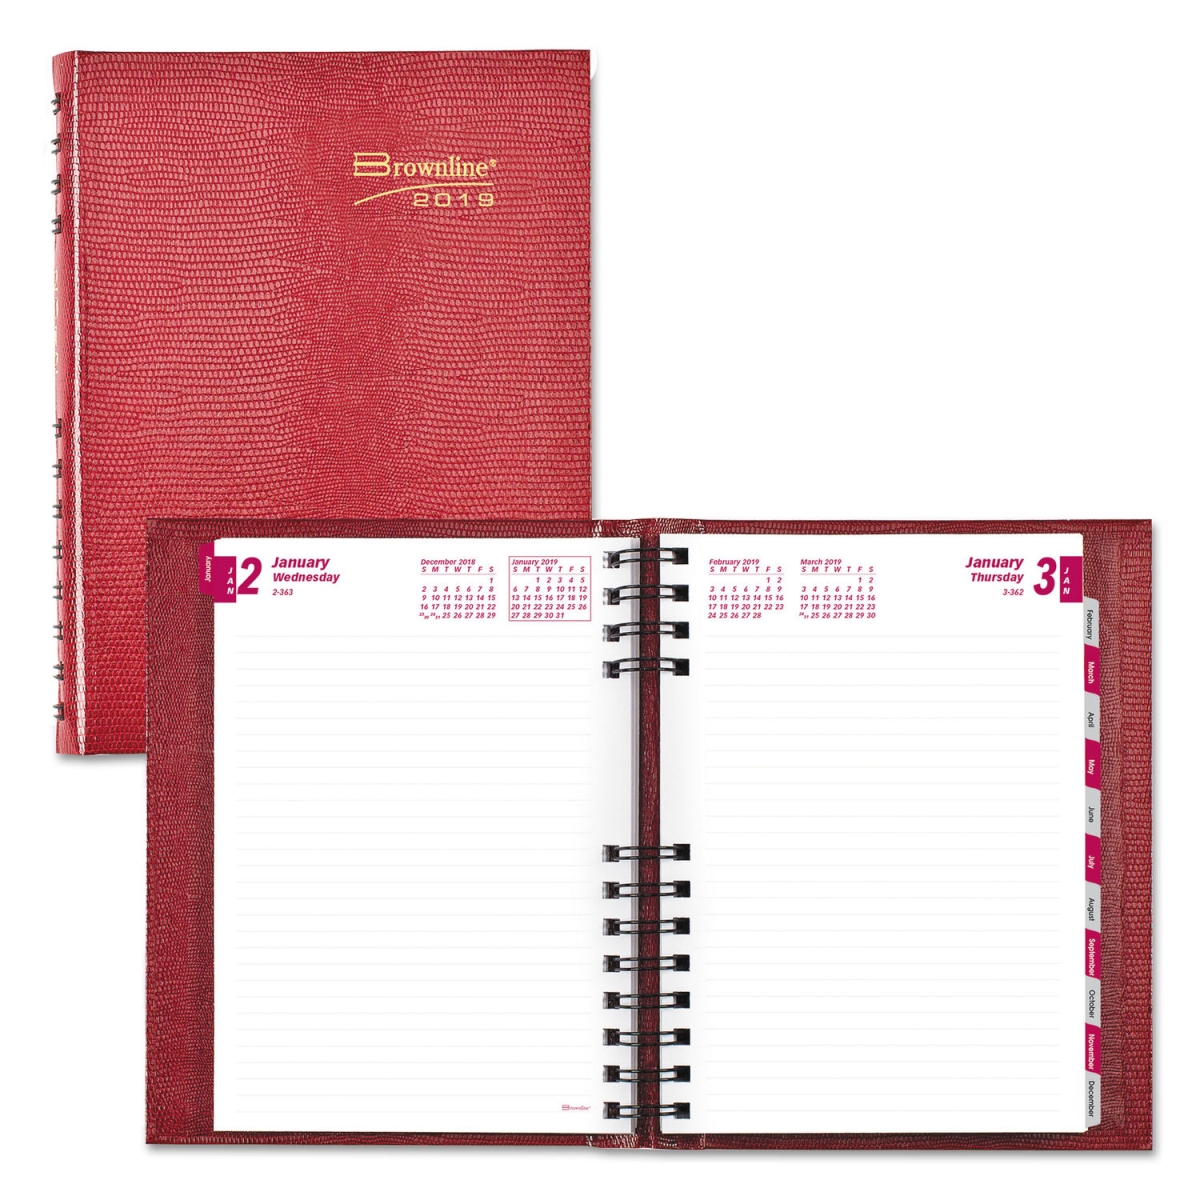 Redcb389cred Coilpro Daily Planner, Ruled 1 Day & Page For 2019, Red - 8.25 X 5.75 In.